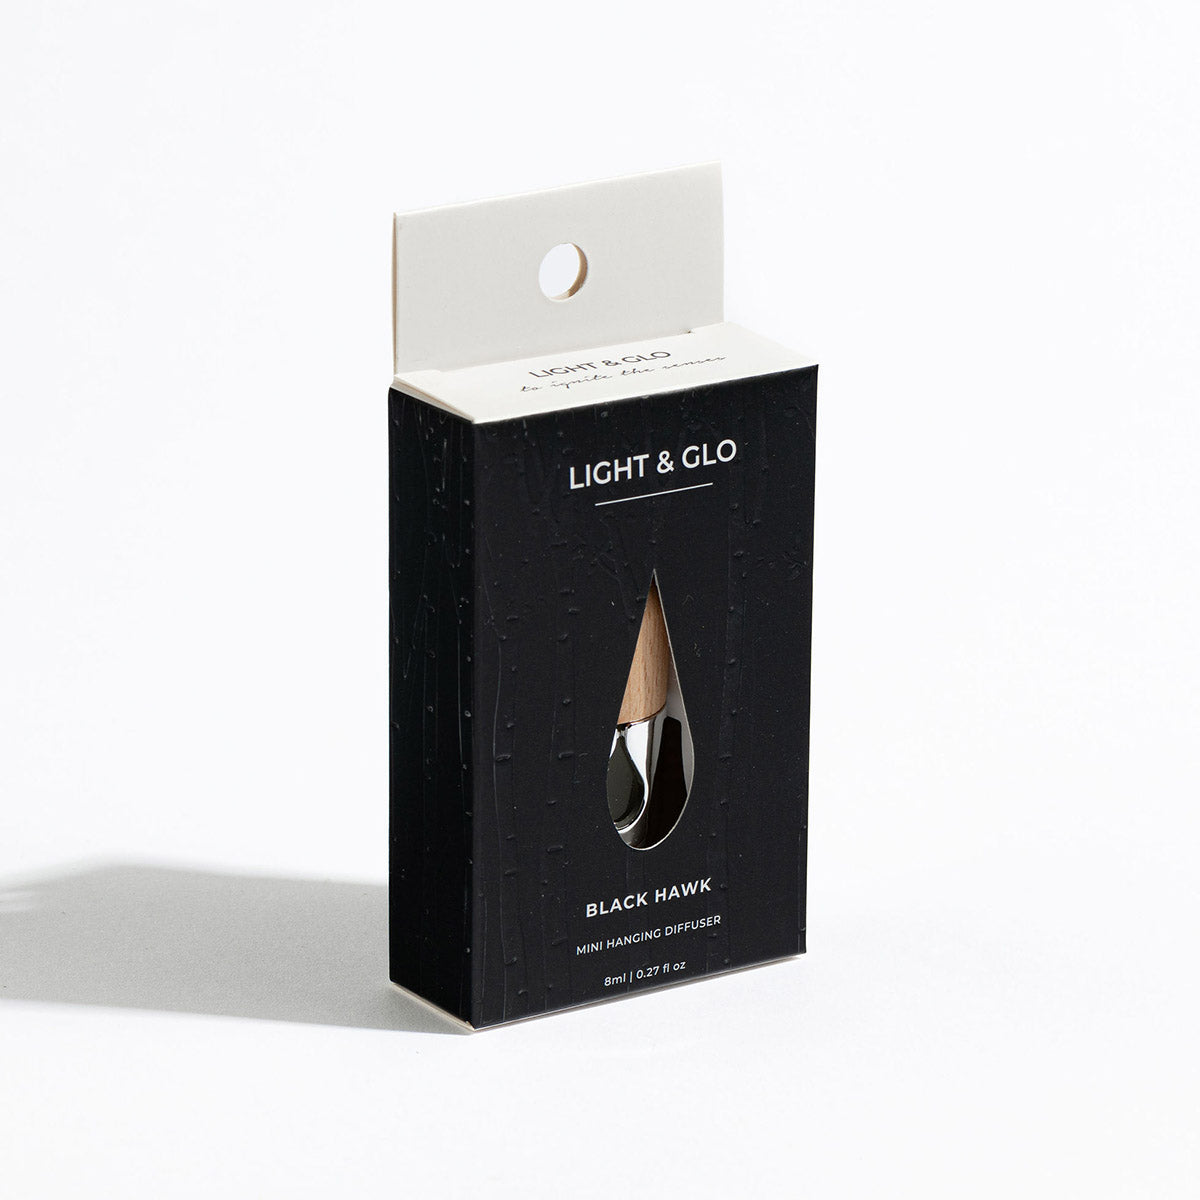 Black Hawk - Mini Hanging Diffuser | Luxury Candles & Home Fragrances by Light + Glo